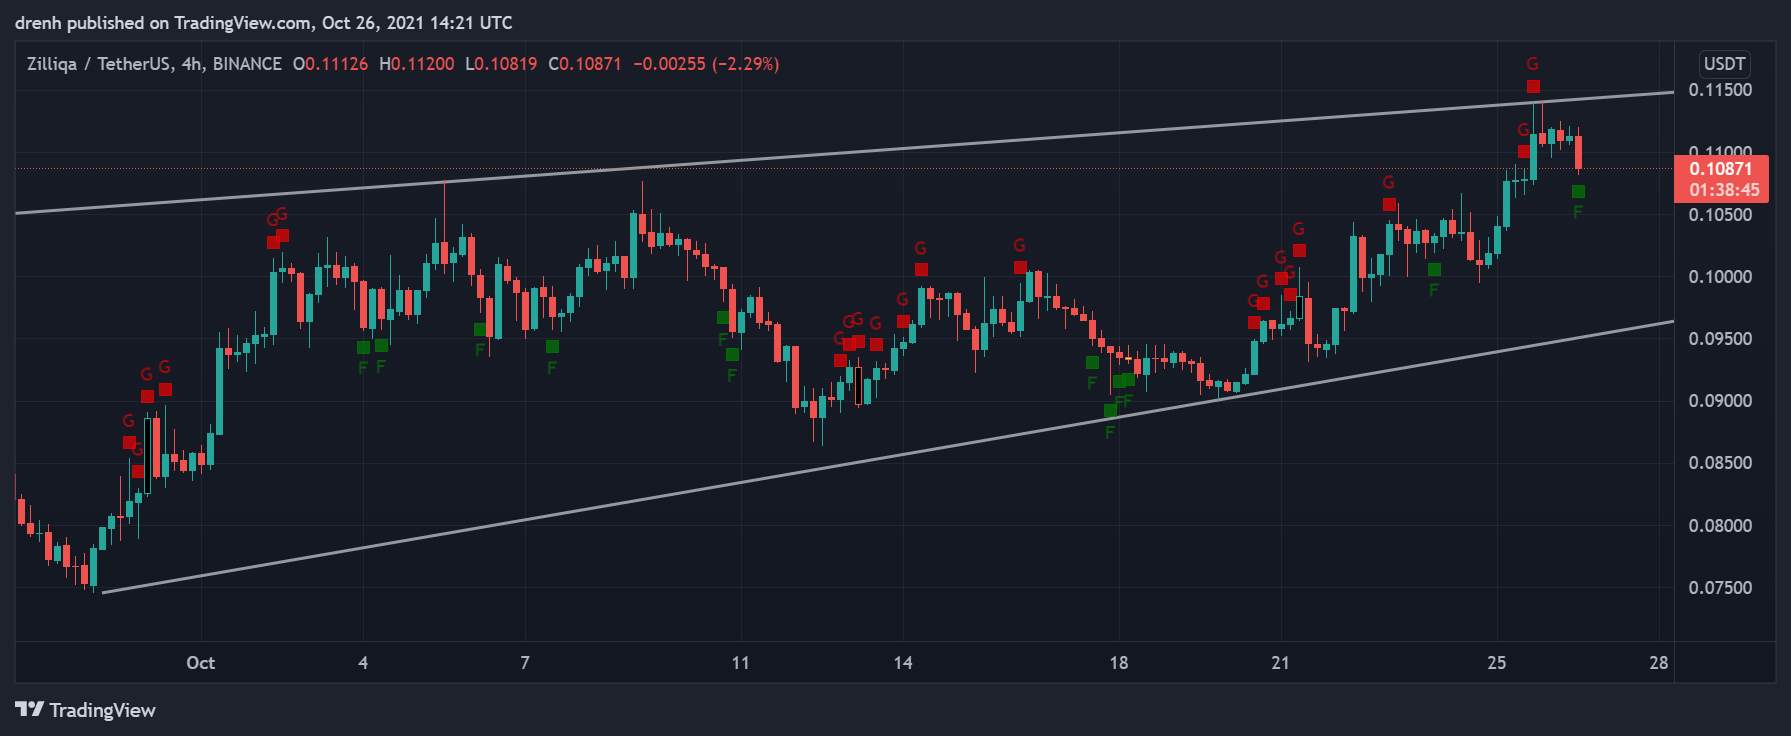 Fear and greed indicator for Zilliqa (ZIL)